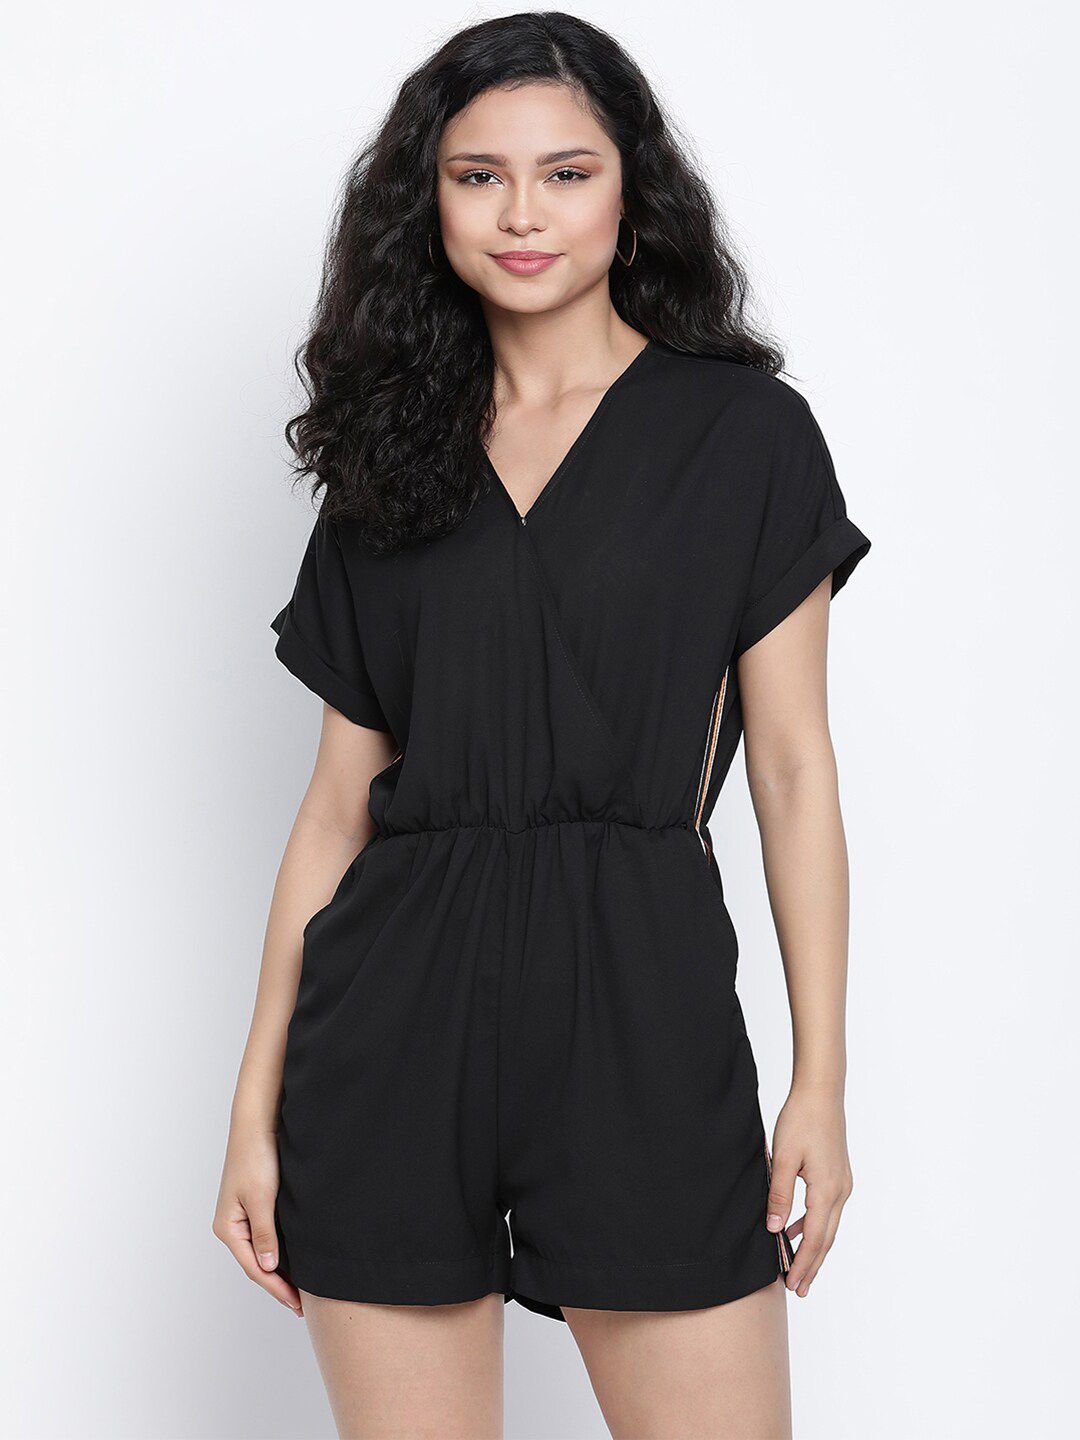 DRAAX Fashions Women Black Solid Playsuit Price in India